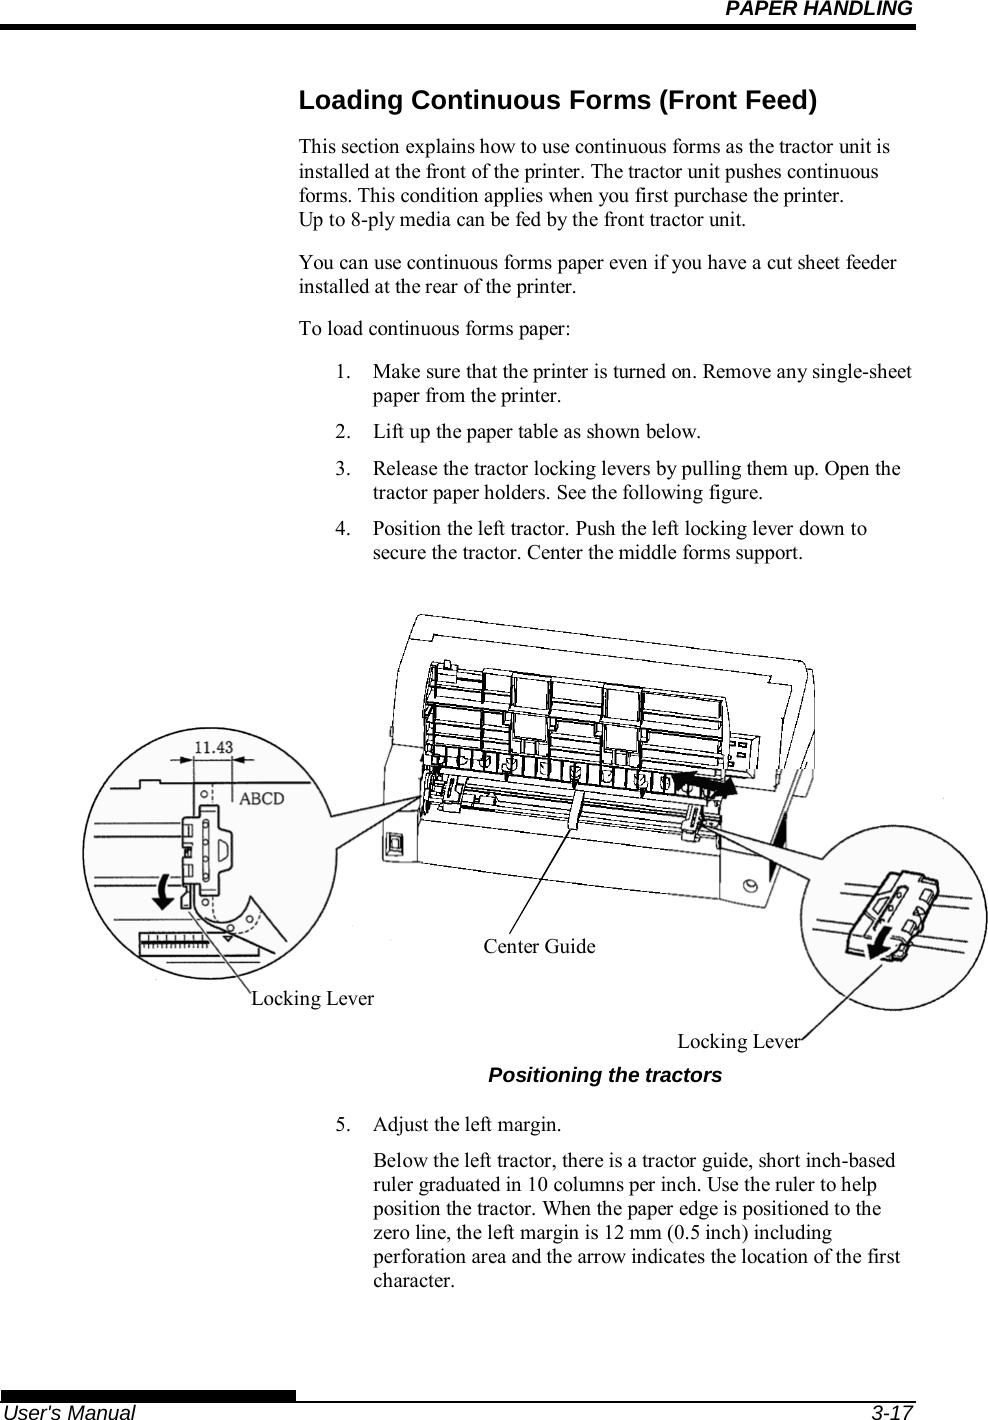 PAPER HANDLING   User&apos;s Manual  3-17 Loading Continuous Forms (Front Feed) This section explains how to use continuous forms as the tractor unit is installed at the front of the printer. The tractor unit pushes continuous forms. This condition applies when you first purchase the printer. Up to 8-ply media can be fed by the front tractor unit. You can use continuous forms paper even if you have a cut sheet feeder installed at the rear of the printer. To load continuous forms paper: 1.  Make sure that the printer is turned on. Remove any single-sheet paper from the printer. 2.  Lift up the paper table as shown below. 3.  Release the tractor locking levers by pulling them up. Open the tractor paper holders. See the following figure. 4.  Position the left tractor. Push the left locking lever down to secure the tractor. Center the middle forms support.               Positioning the tractors 5.  Adjust the left margin. Below the left tractor, there is a tractor guide, short inch-based ruler graduated in 10 columns per inch. Use the ruler to help position the tractor. When the paper edge is positioned to the zero line, the left margin is 12 mm (0.5 inch) including perforation area and the arrow indicates the location of the first character. Locking Lever Locking LeverCenter Guide 